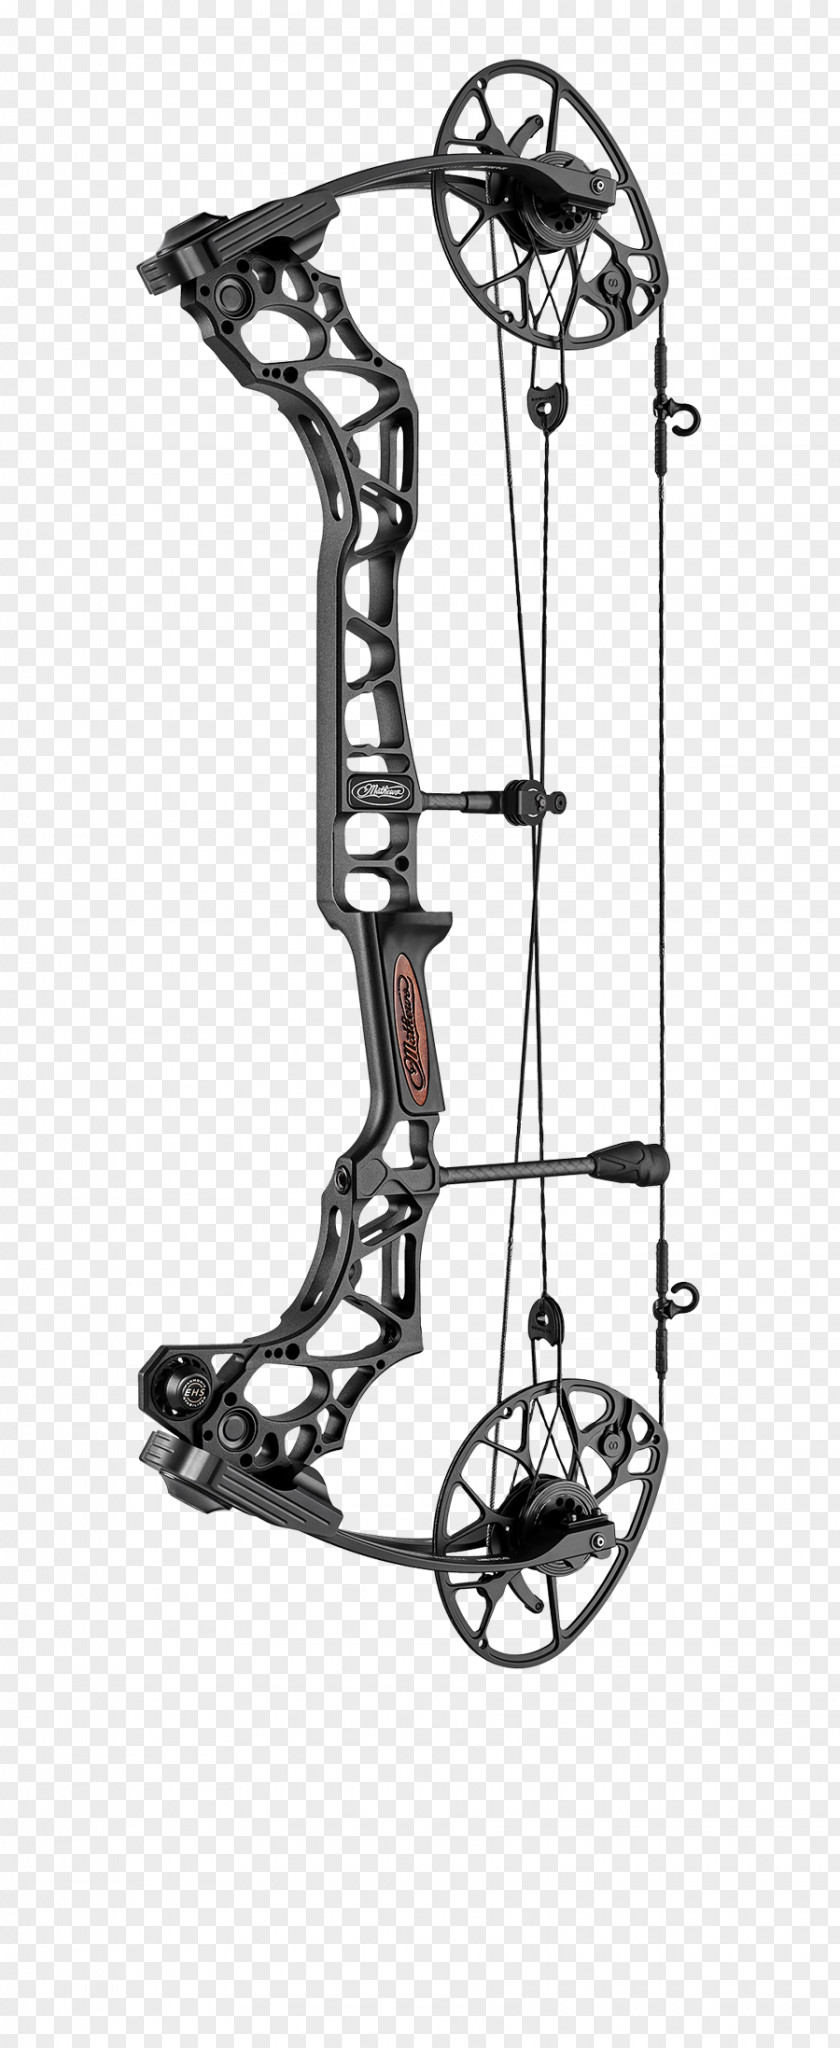 Archery Bowhunting Compound Bows Bow And Arrow PNG